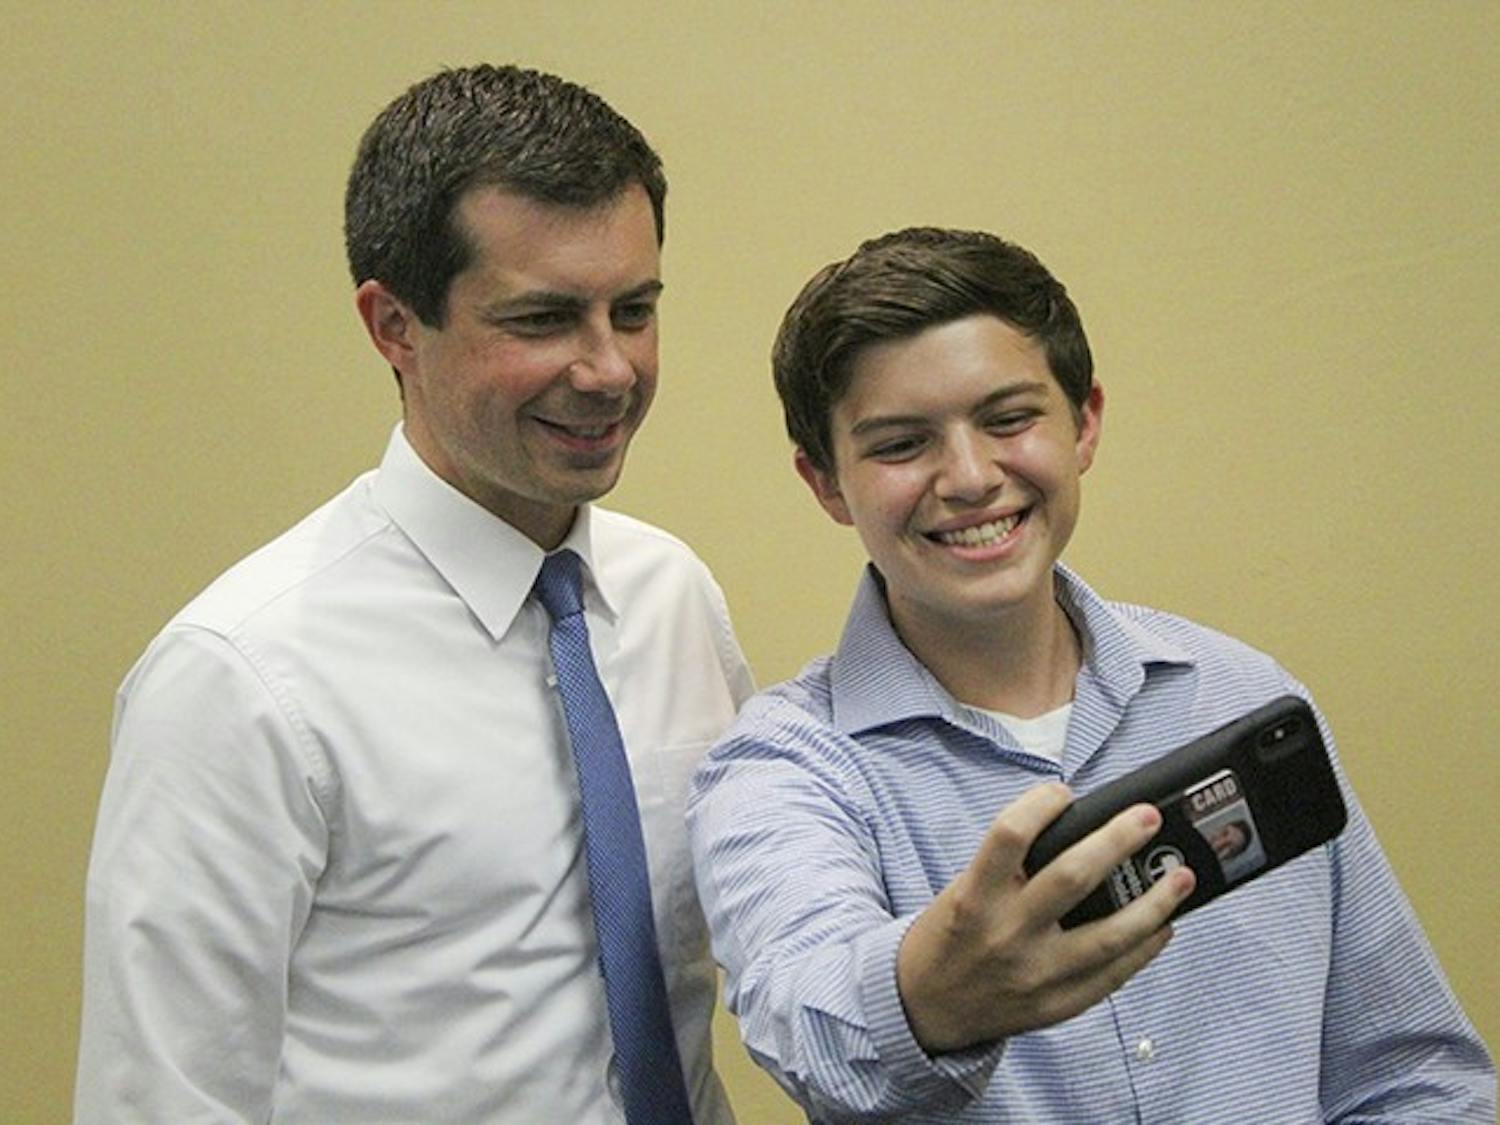 First-year business major Hayden Shipley takes a selfie with democratic presidential candidate Pete Buttegieg 